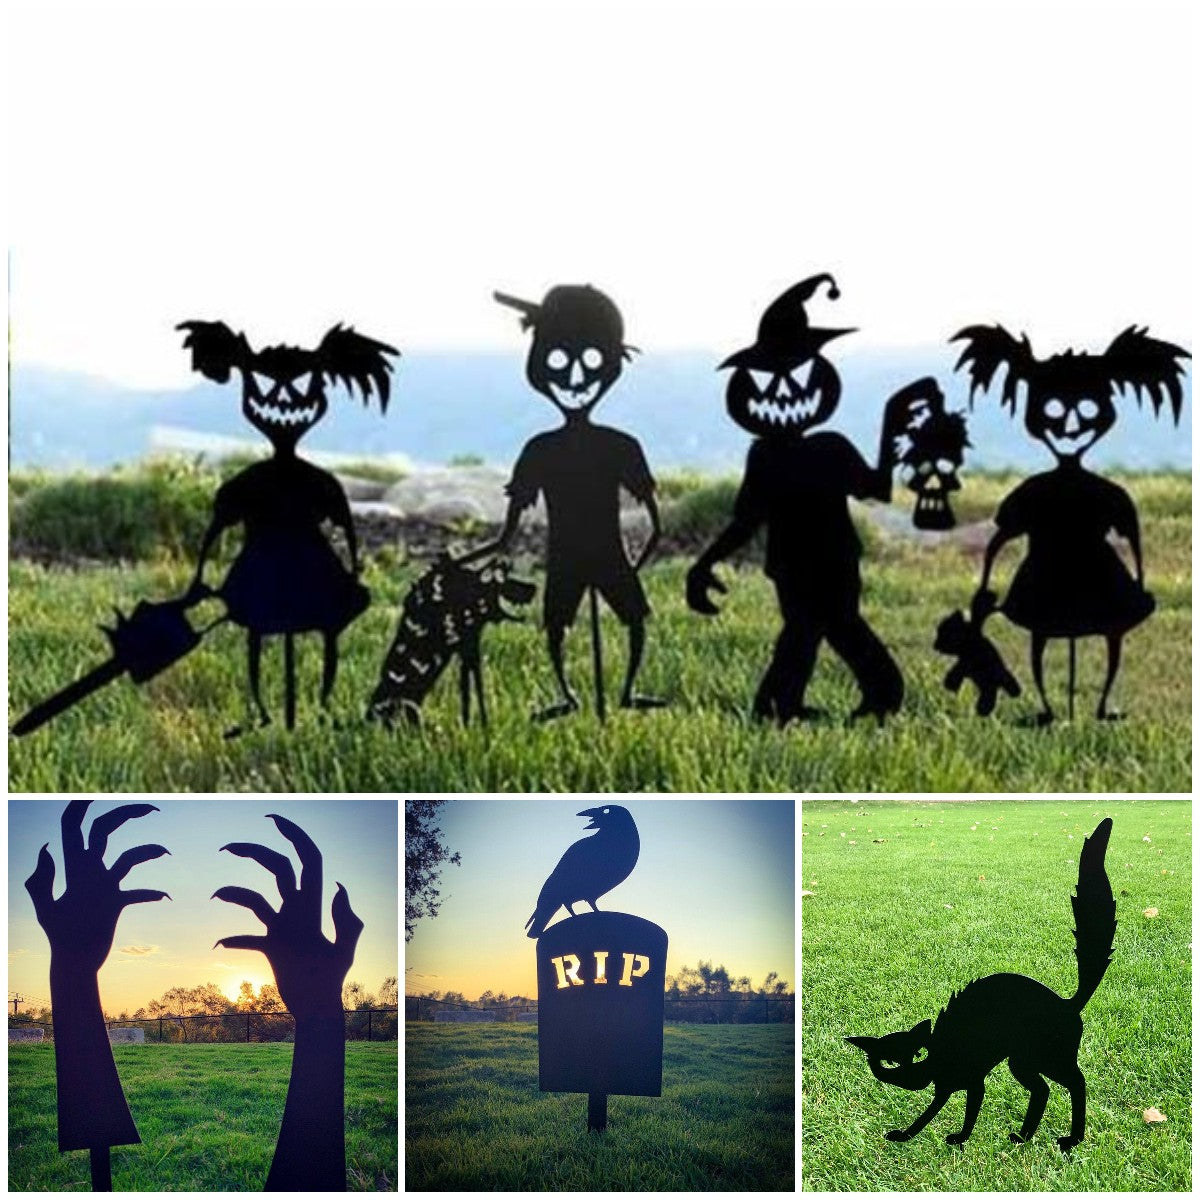 👻Cute and Unique ghost zombies - Halloween yard decor Metal art👻